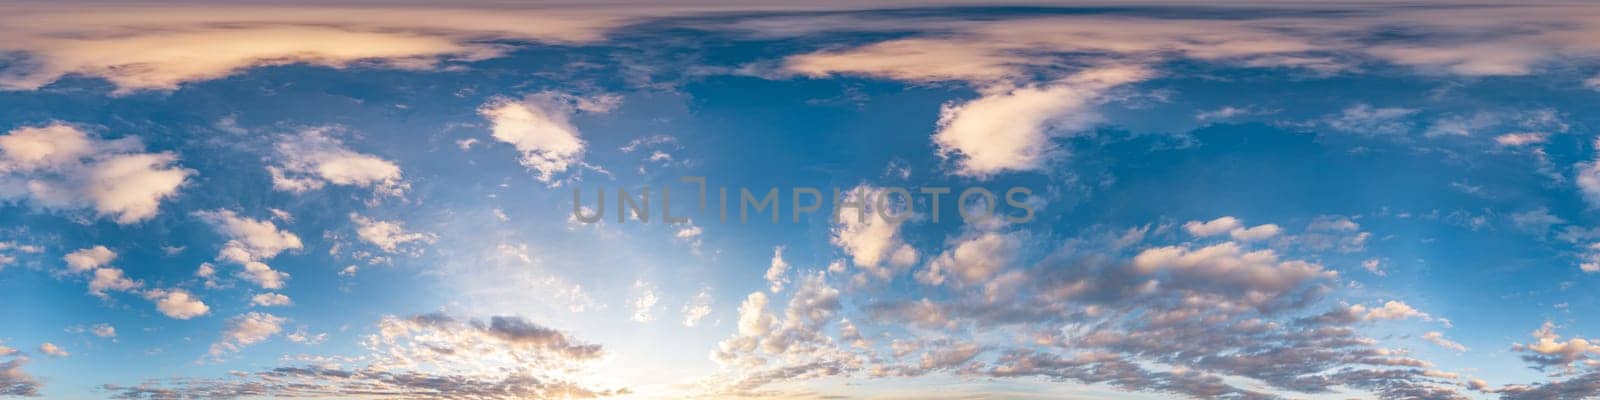 Sunset sky with bright glowing pink Cirrus clouds. Seamless spherical HDR 360 panorama. Full zenith or sky dome in 3D, sky replacement for aerial drone panoramas. Climate and weather change. by Matiunina